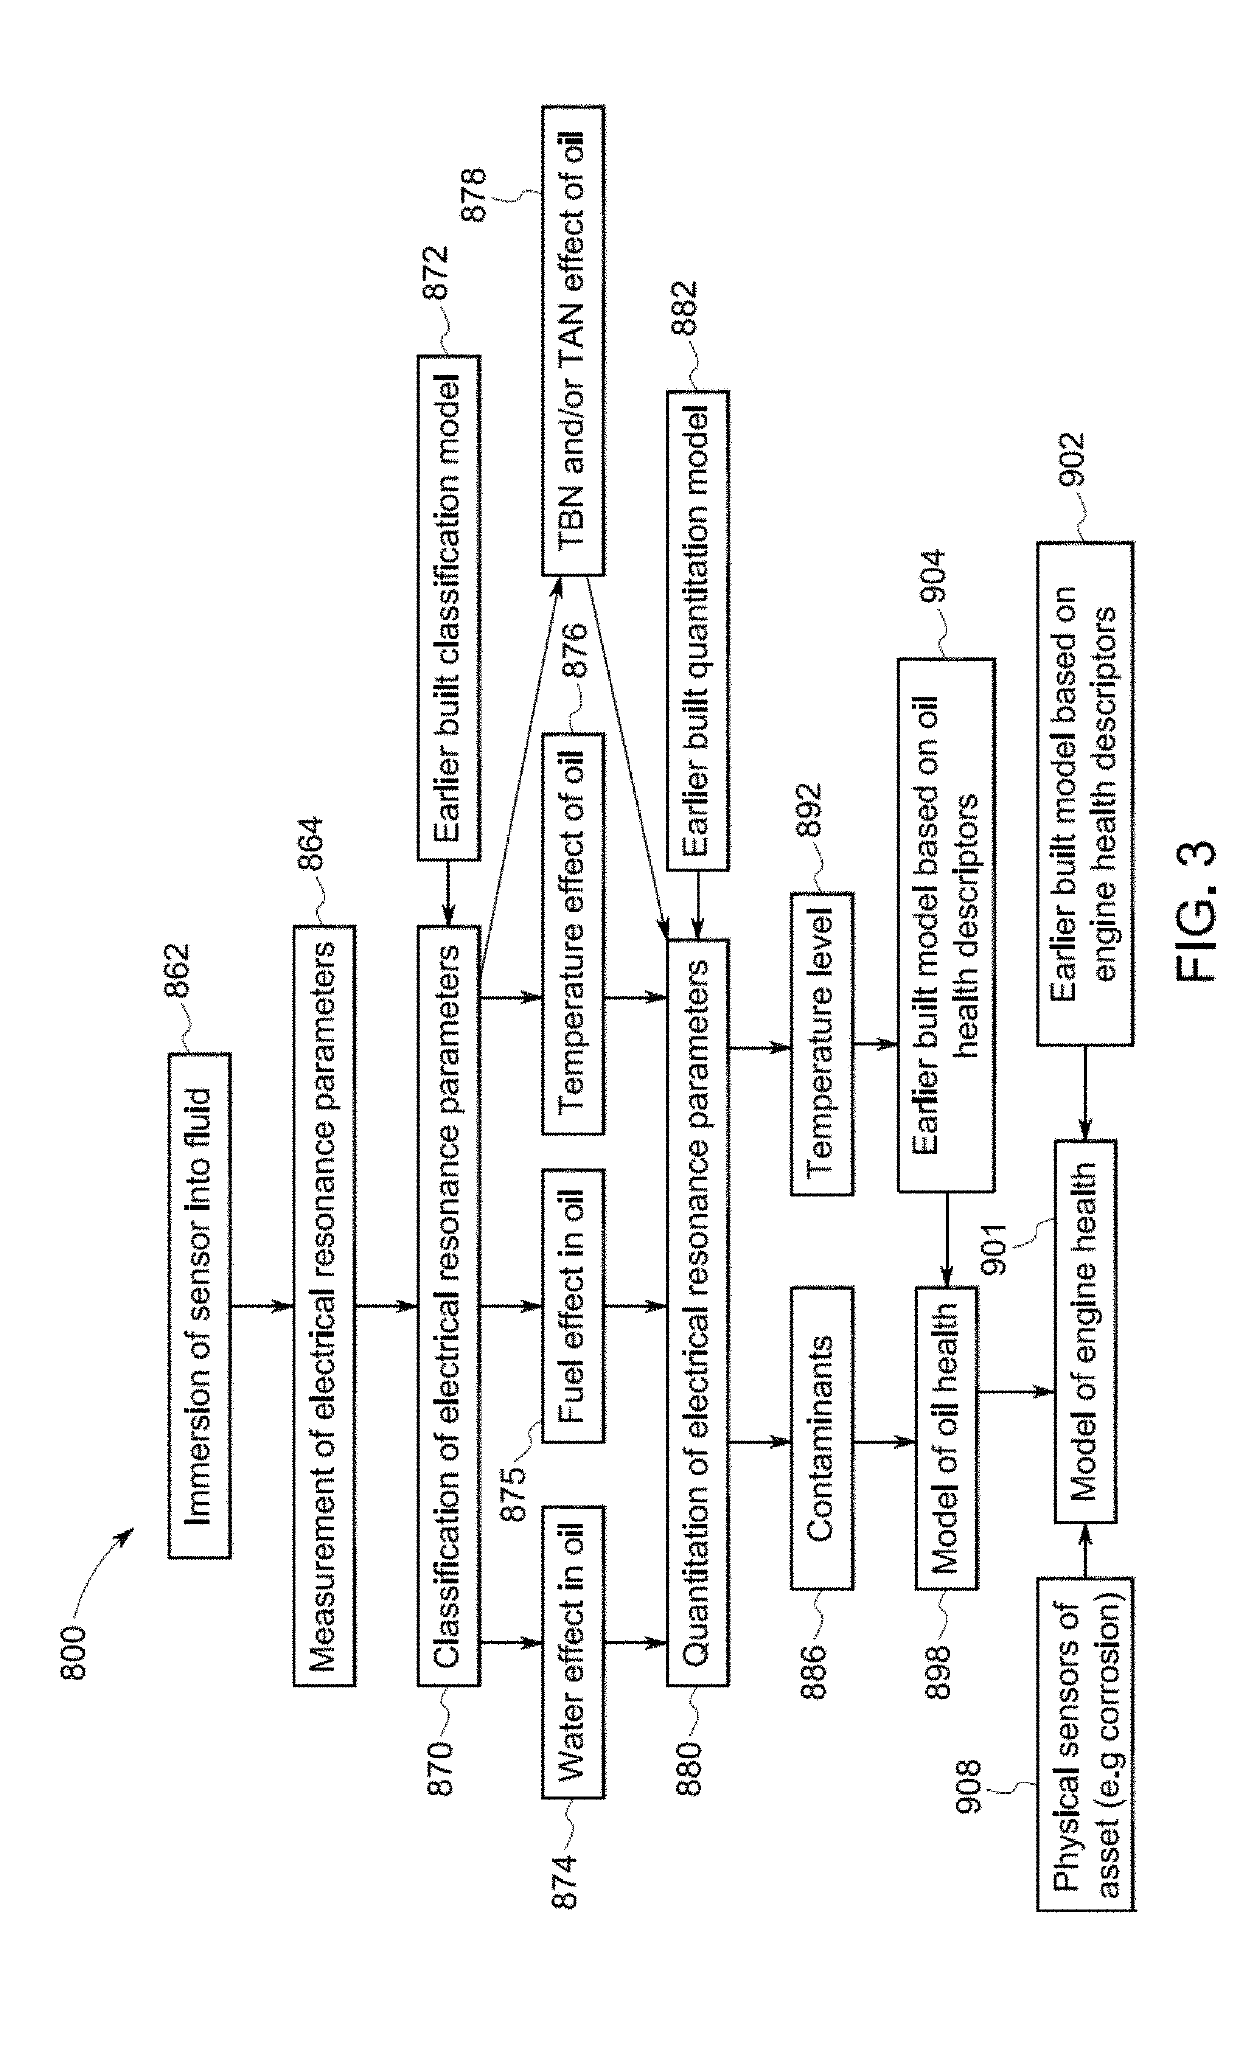 Locomotive sensor system for monitoring engine and lubricant health